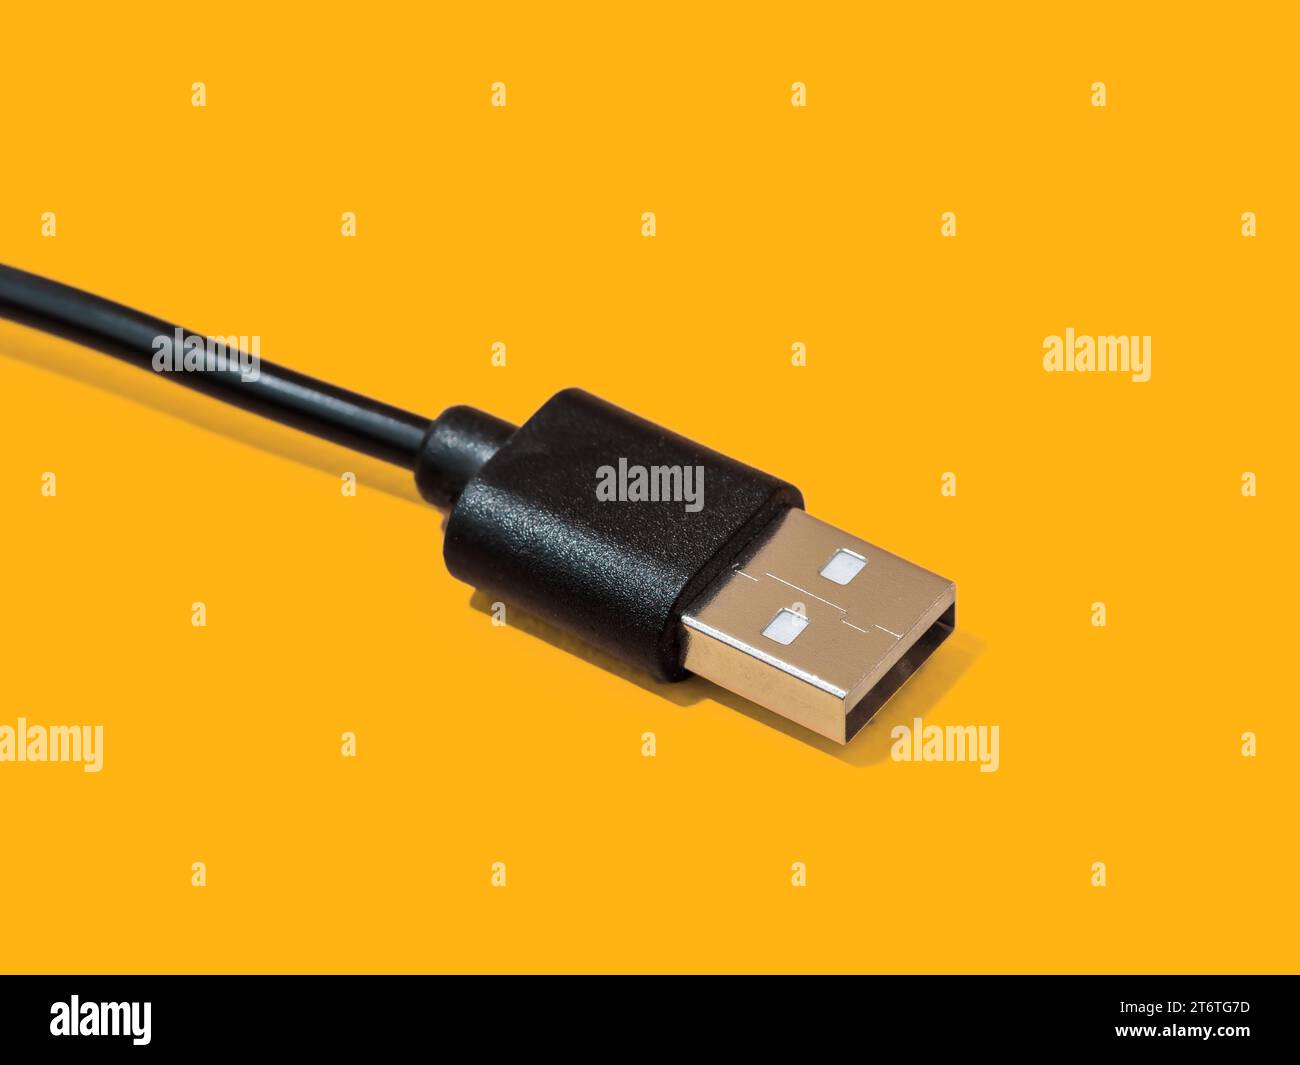 Micro USB cable close-up on yellow background Stock Photo